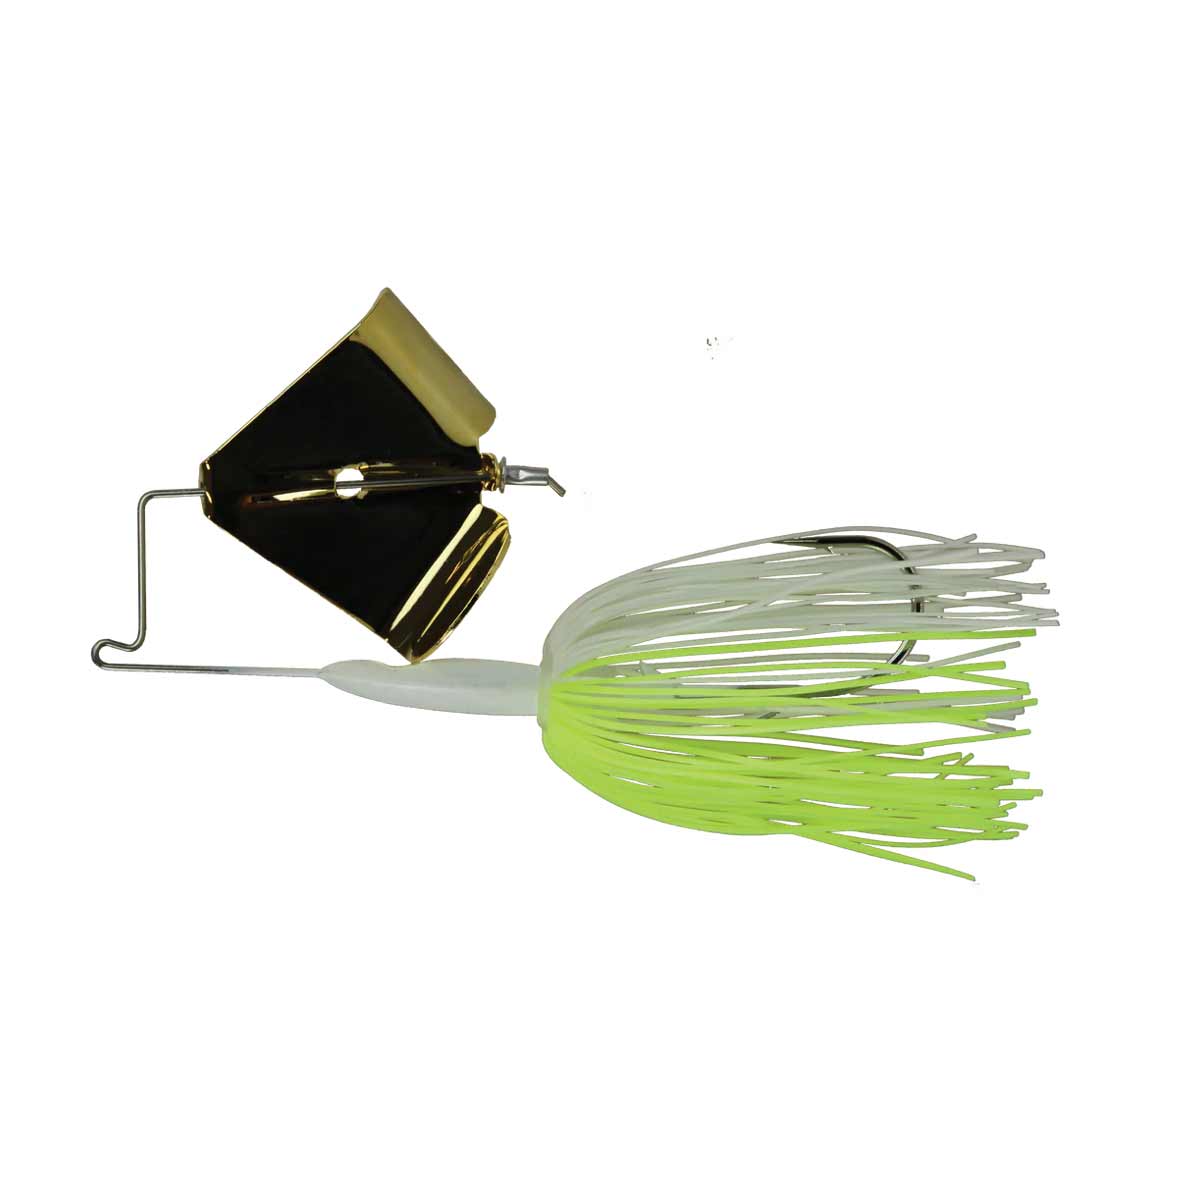 World Wide Buzzer_Gold Blade - White/Chartreuse*